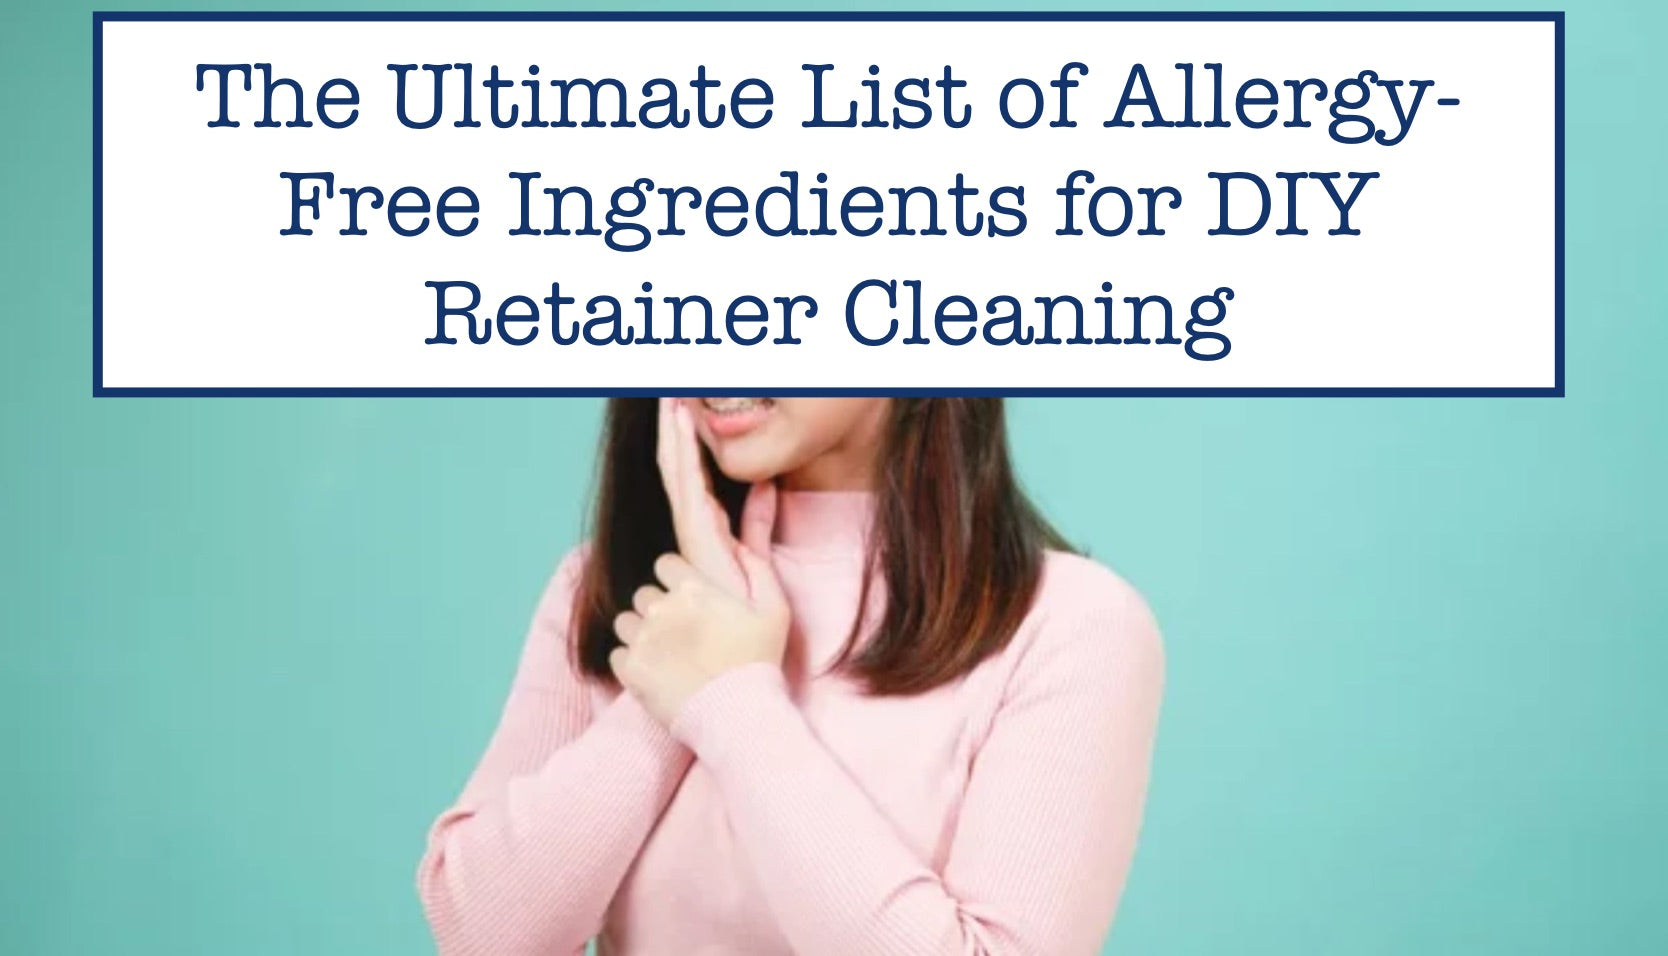 The Ultimate List of Allergy-Free Ingredients for DIY Retainer Cleaning